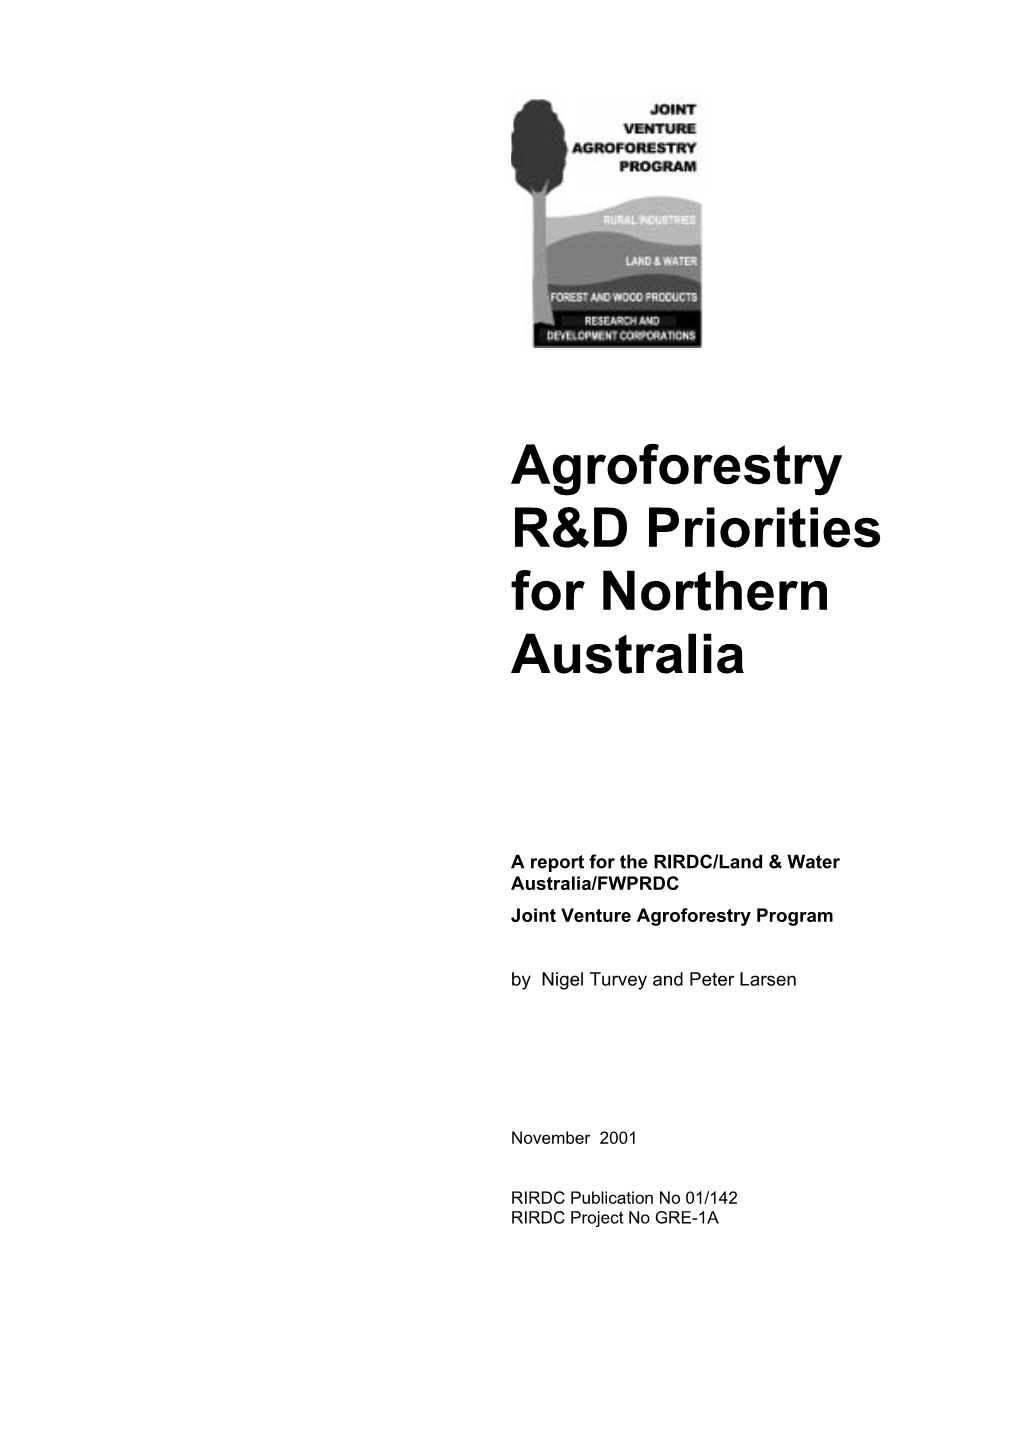 Agroforestry R&D Priorities for Northern Australia